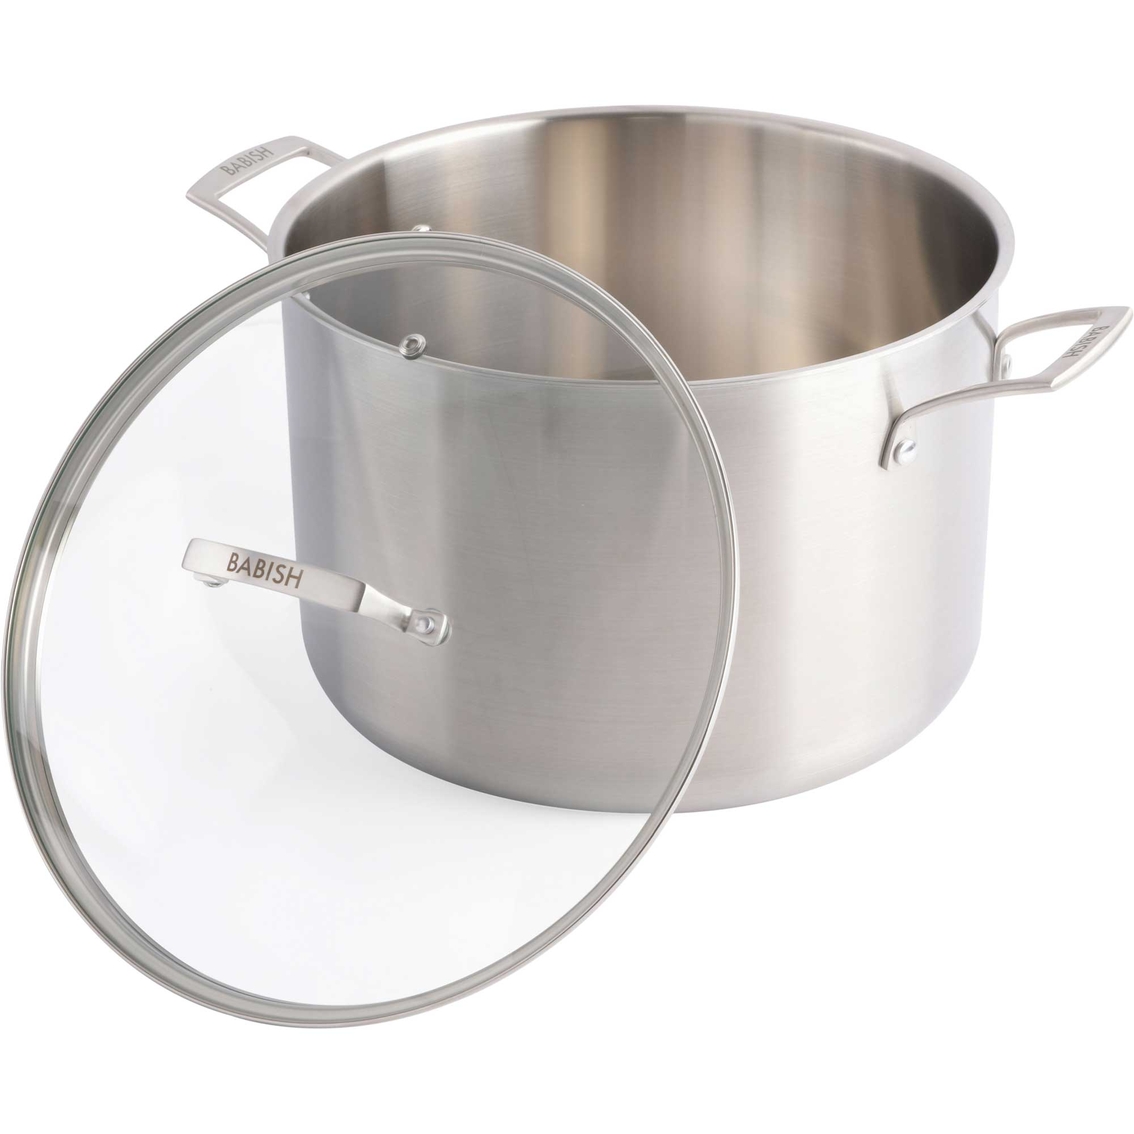 Babish 12 Qt. Tri Ply Stainless Steel Stock Pot With Lid | Stock Pots ...